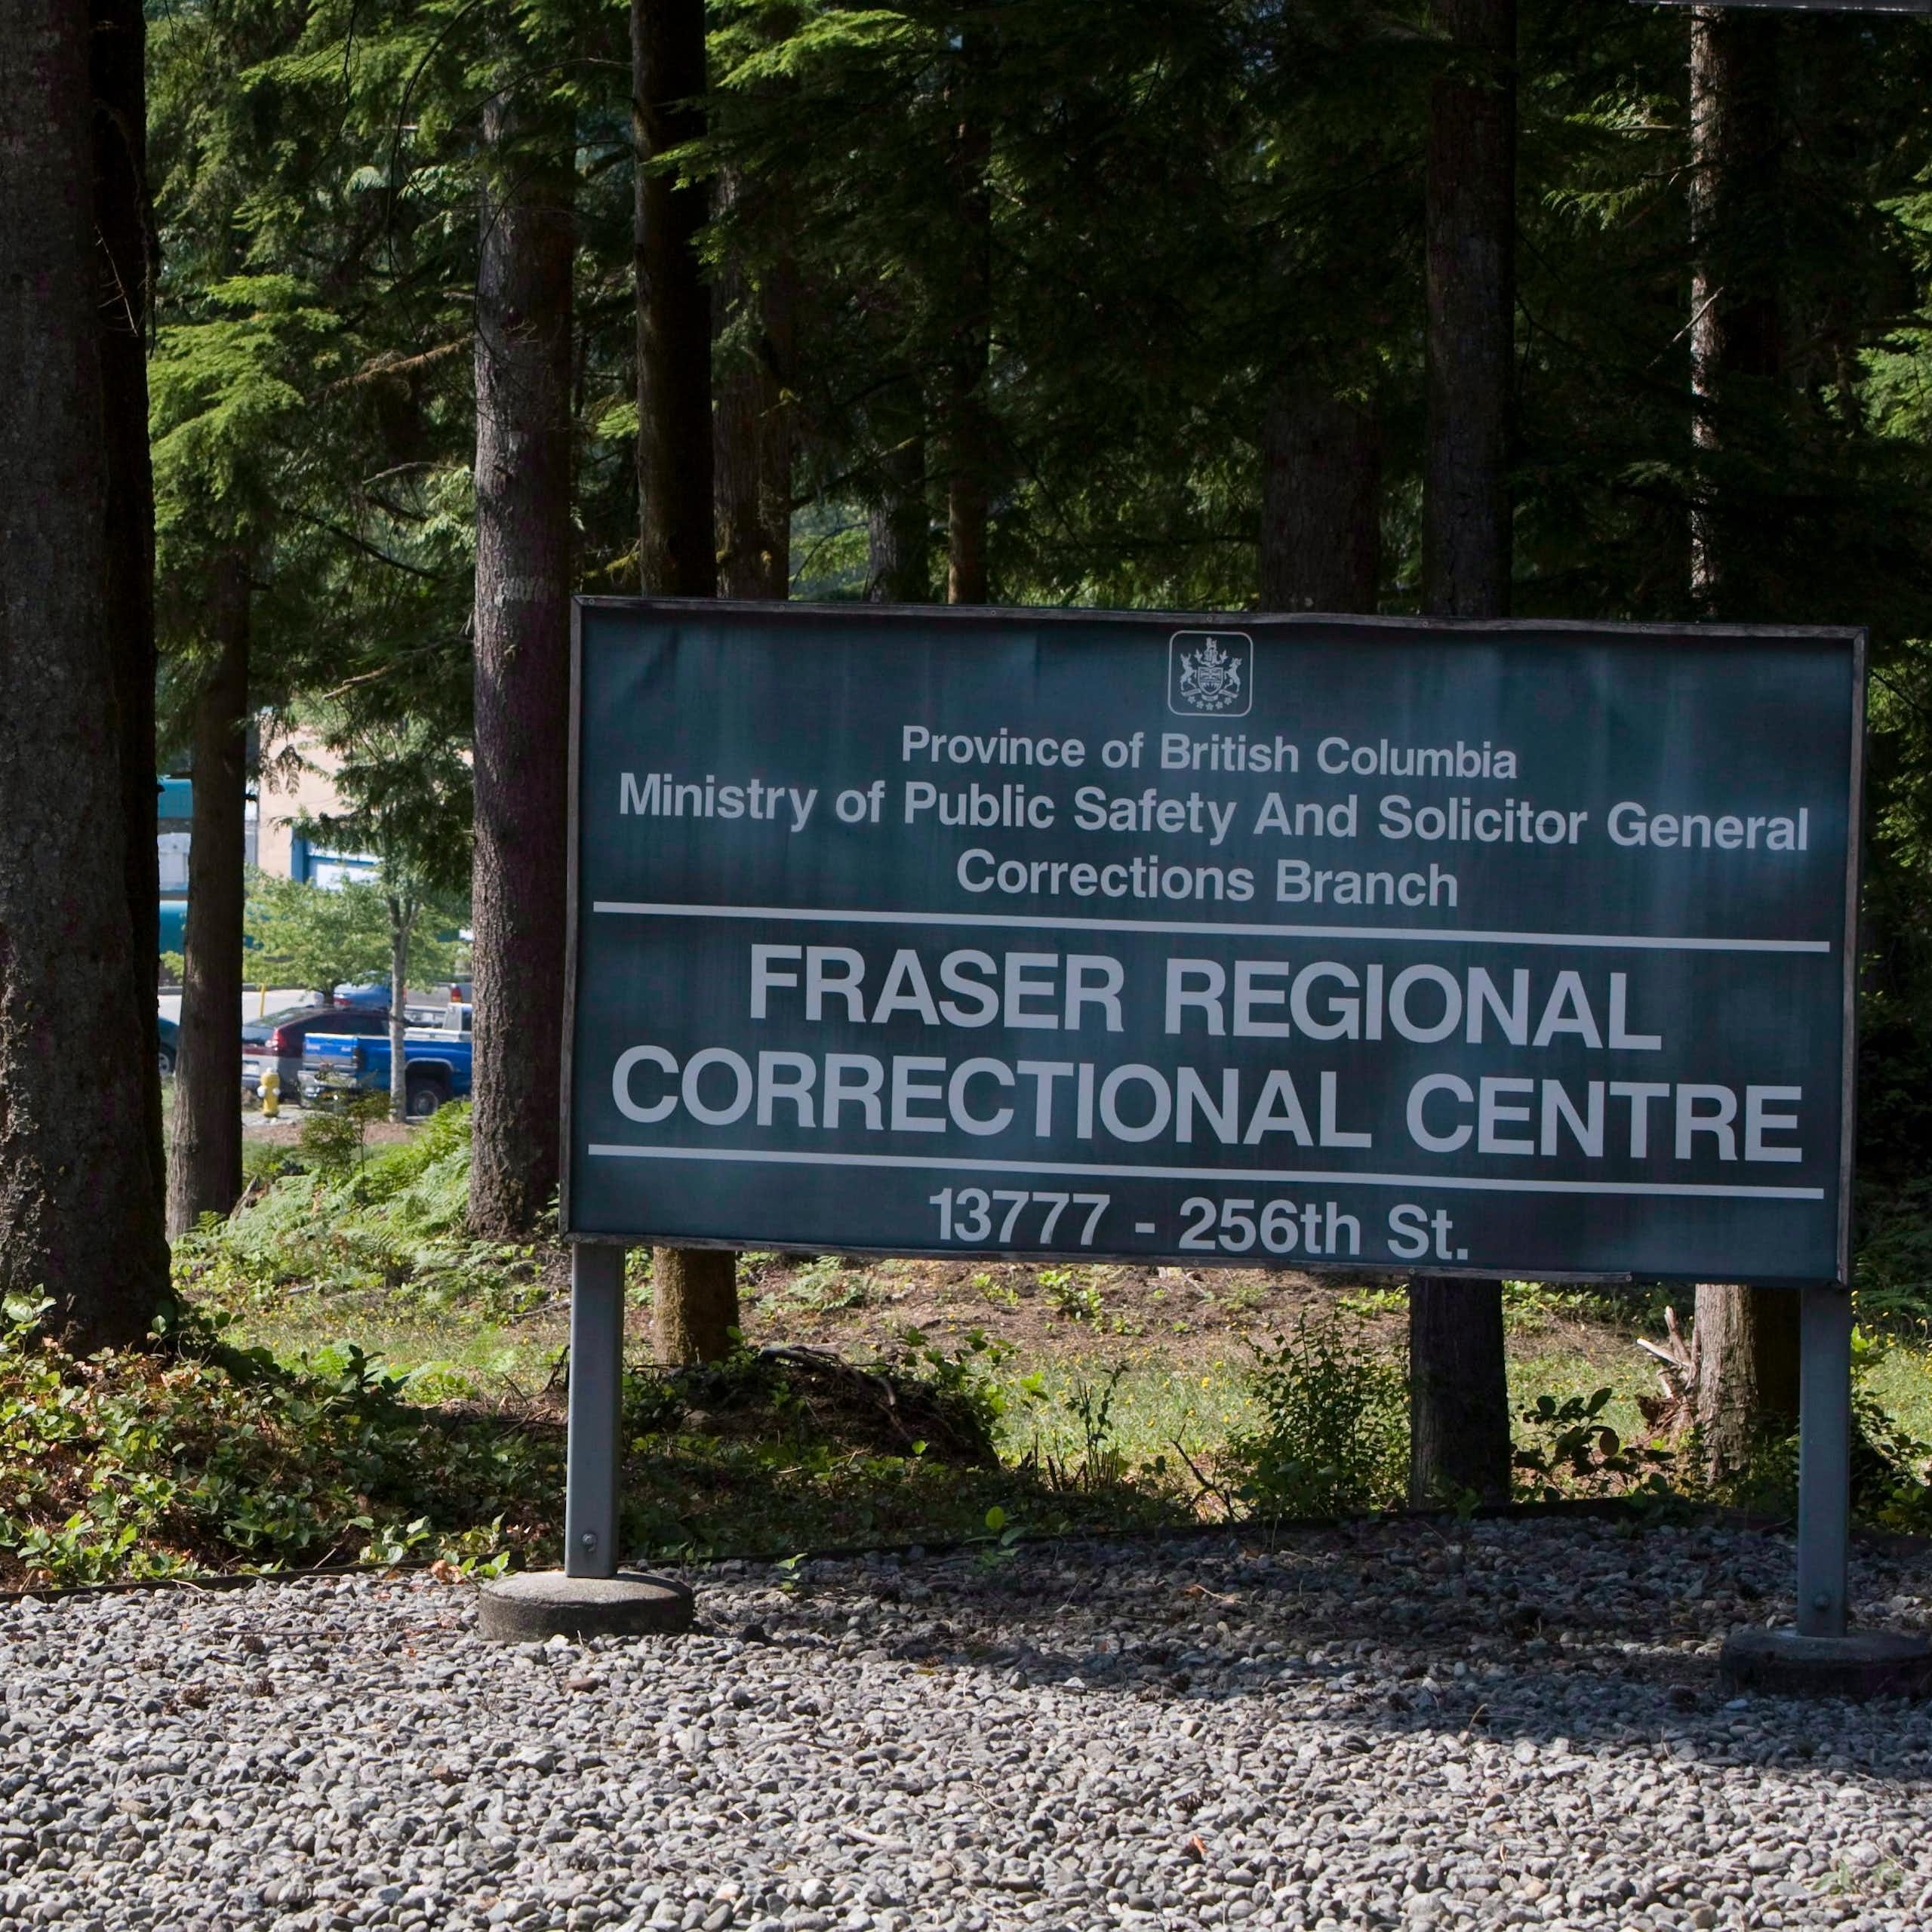 A sign in a wooded area reading" fraser regional correctional centre 